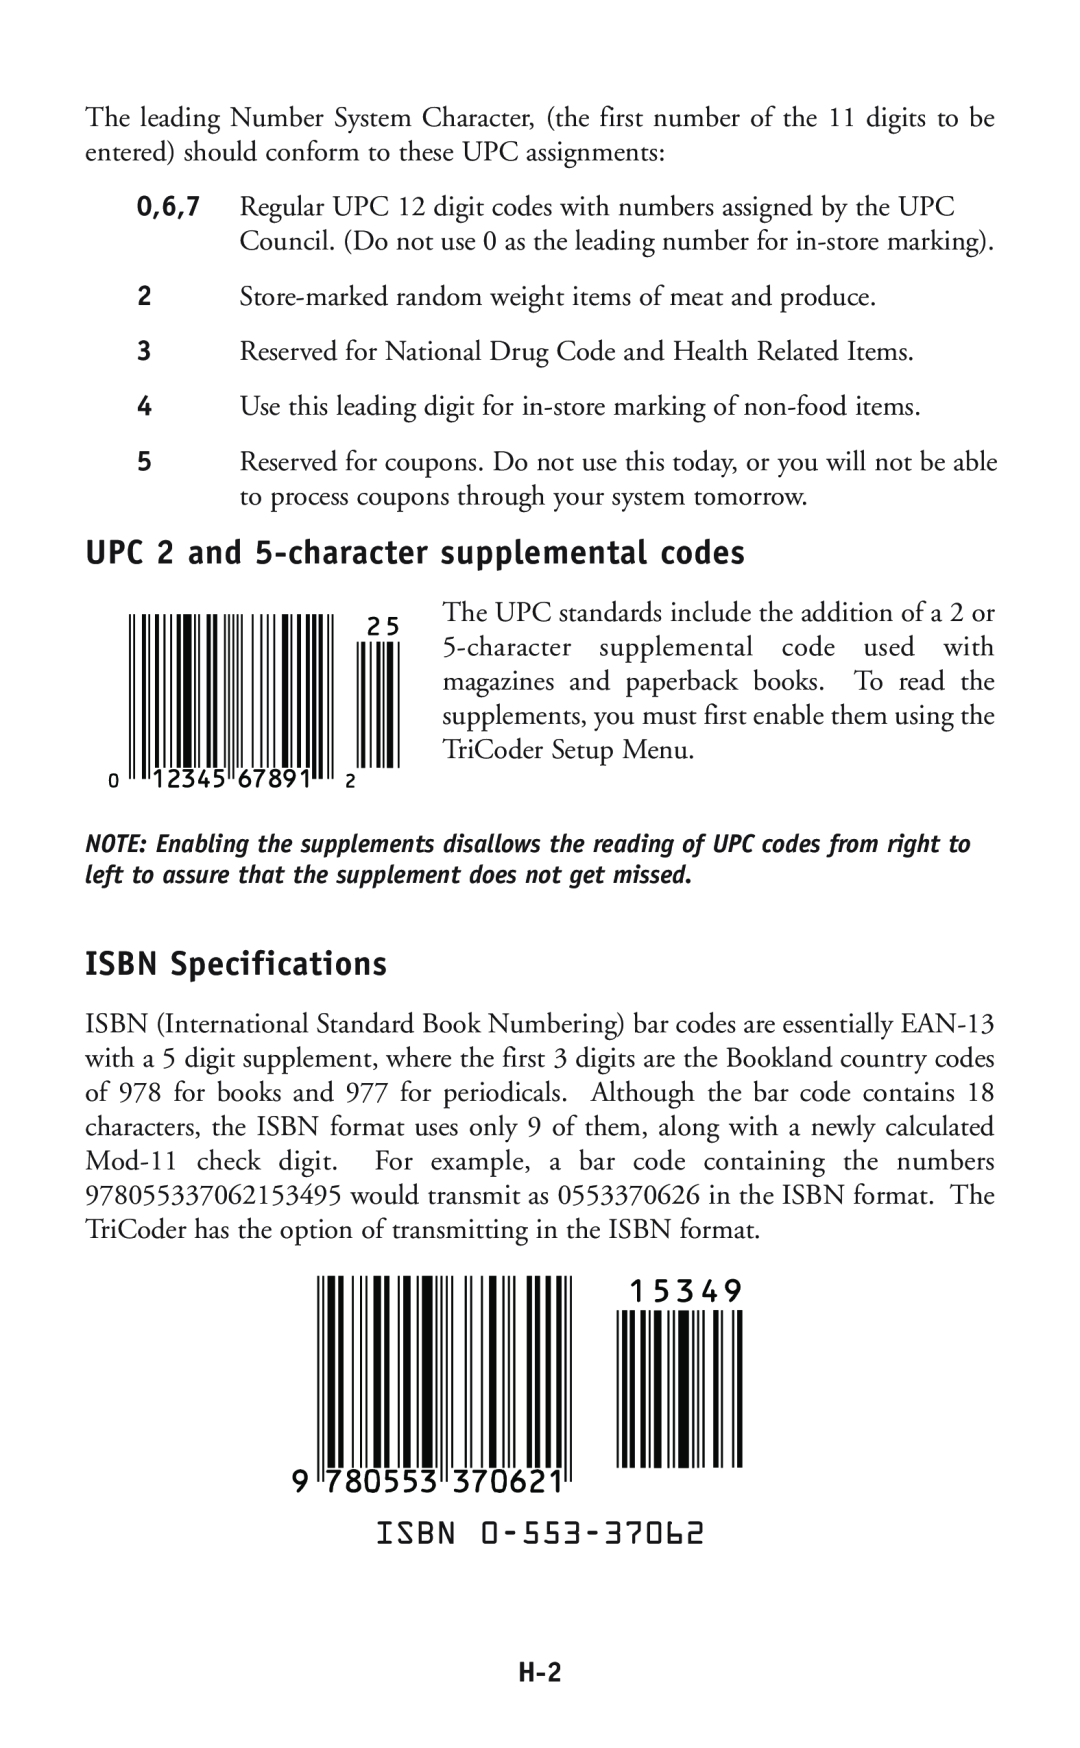 Worth Data P11/12 user manual UPC 2 and 5-character supplemental codes, ISBN Specifications 